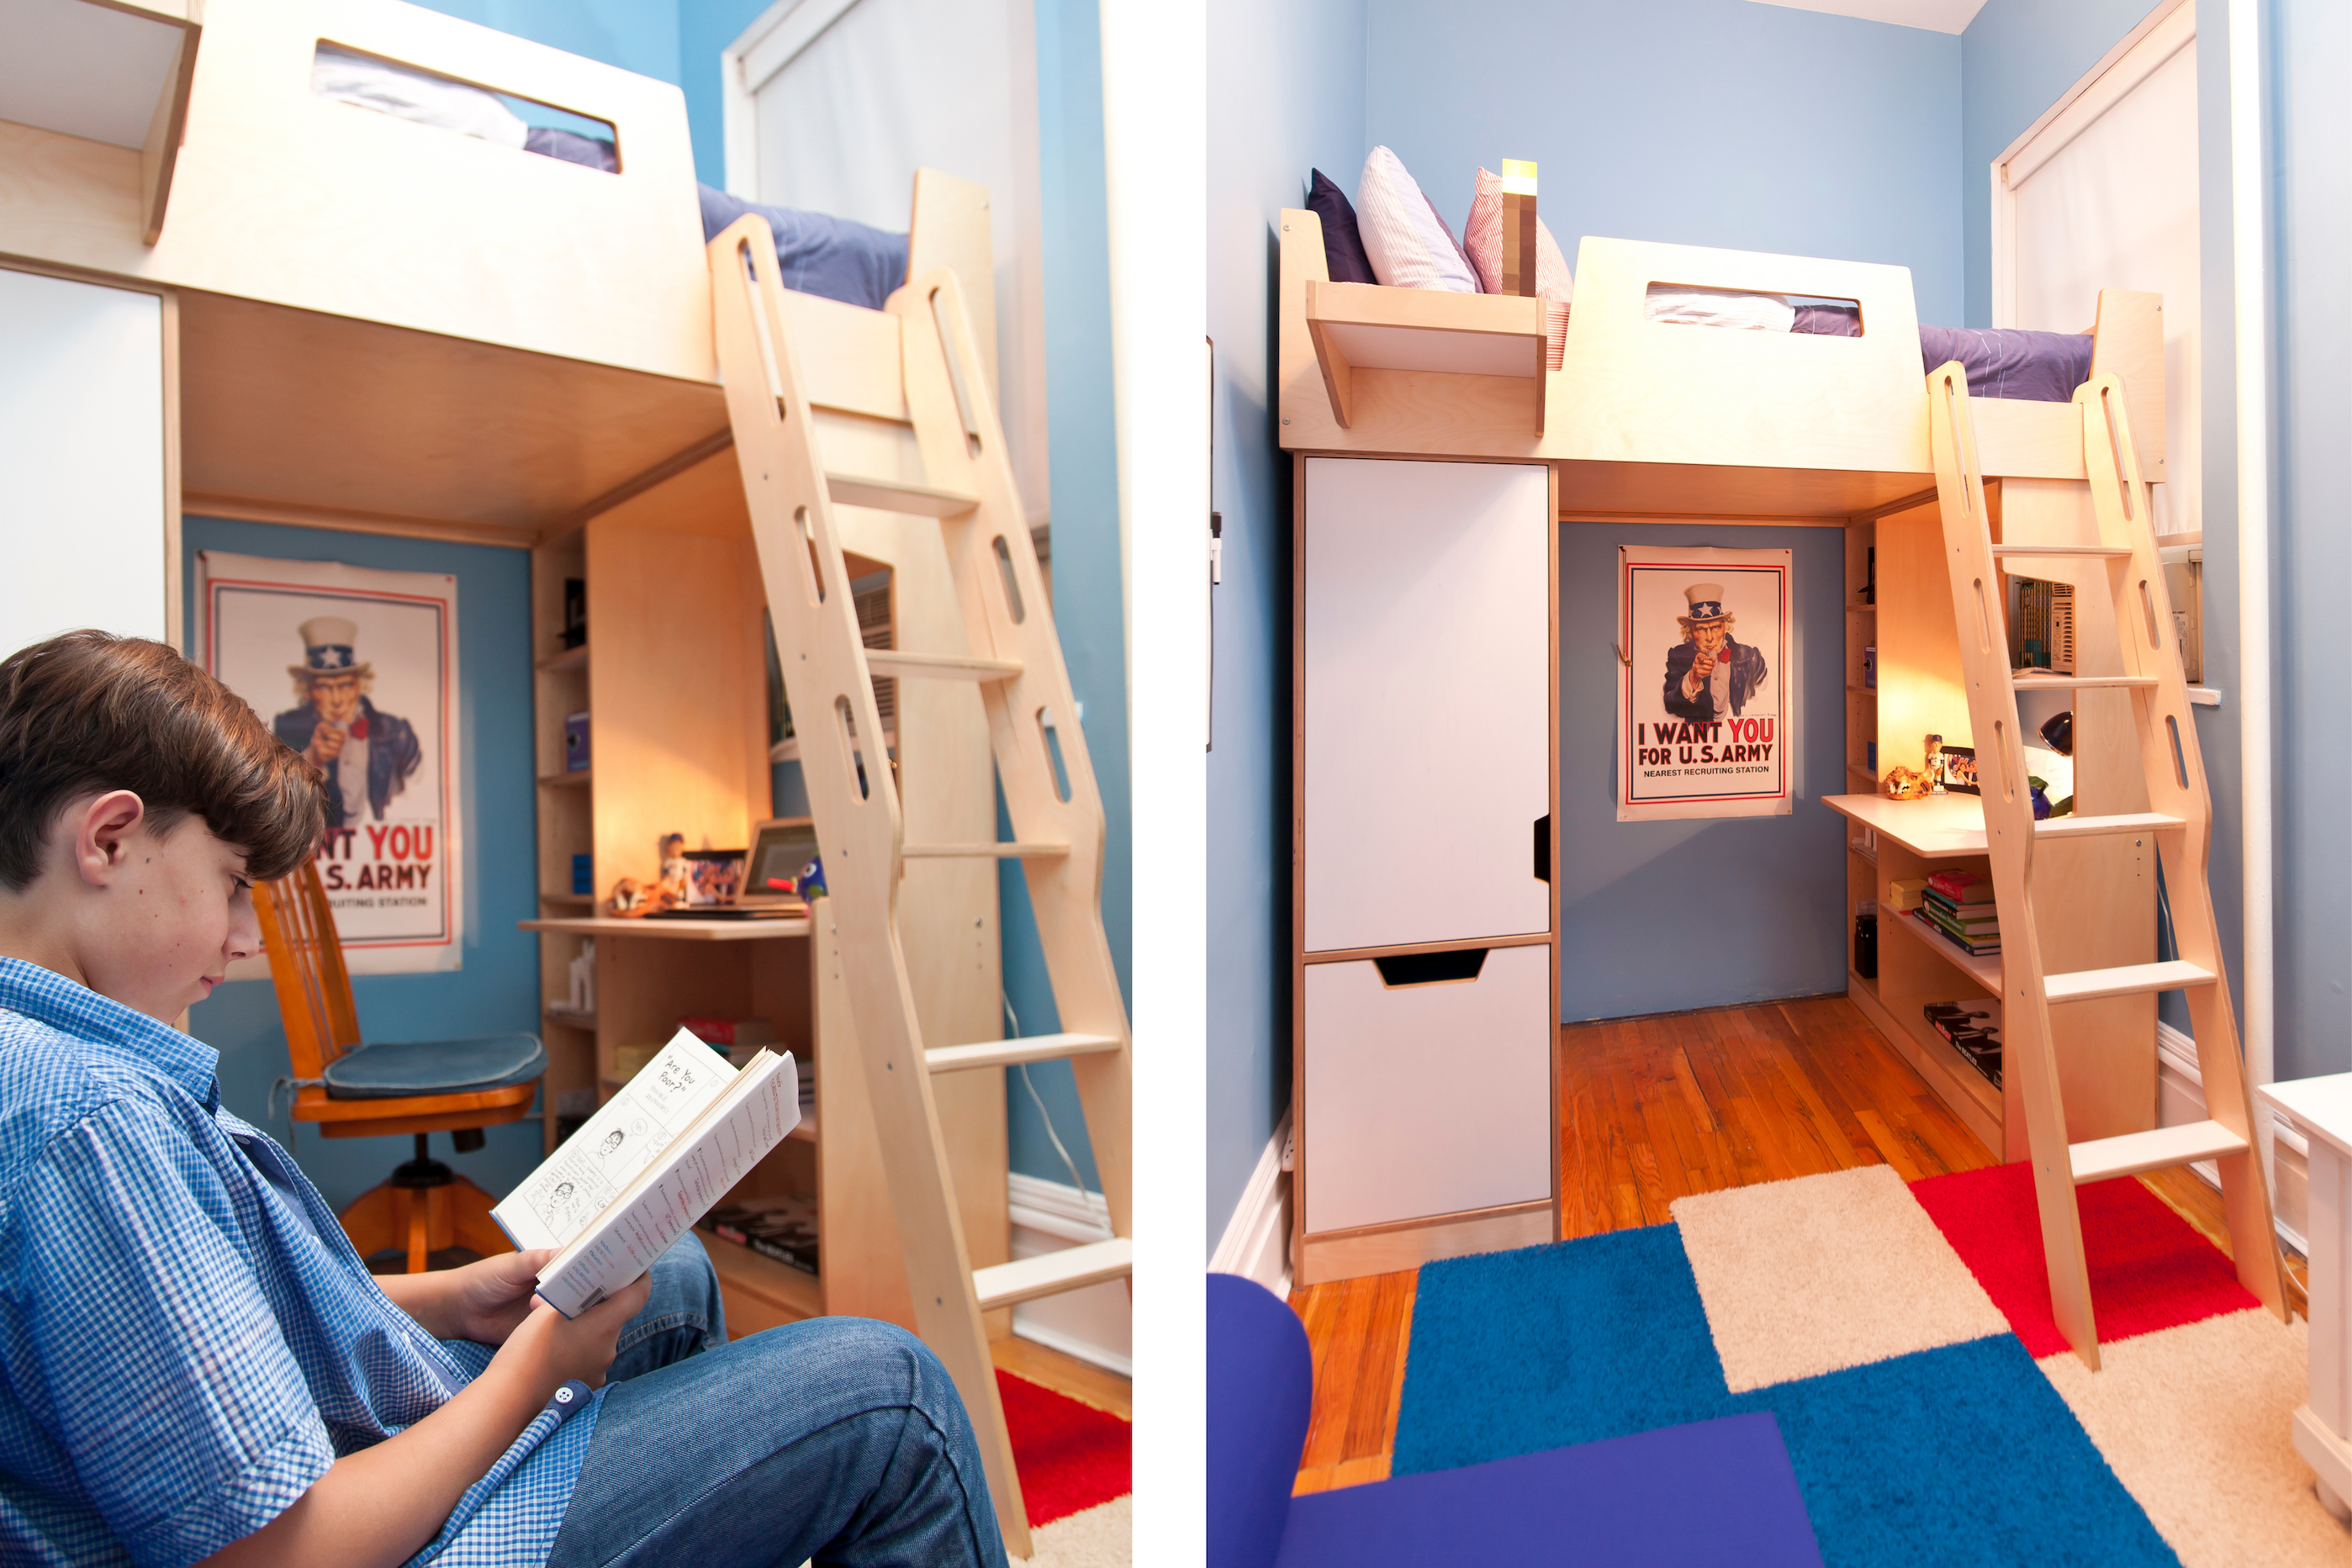 Collage of images: left, a boy reading under a loft bed; right, close view of the bed with a desk underneath.